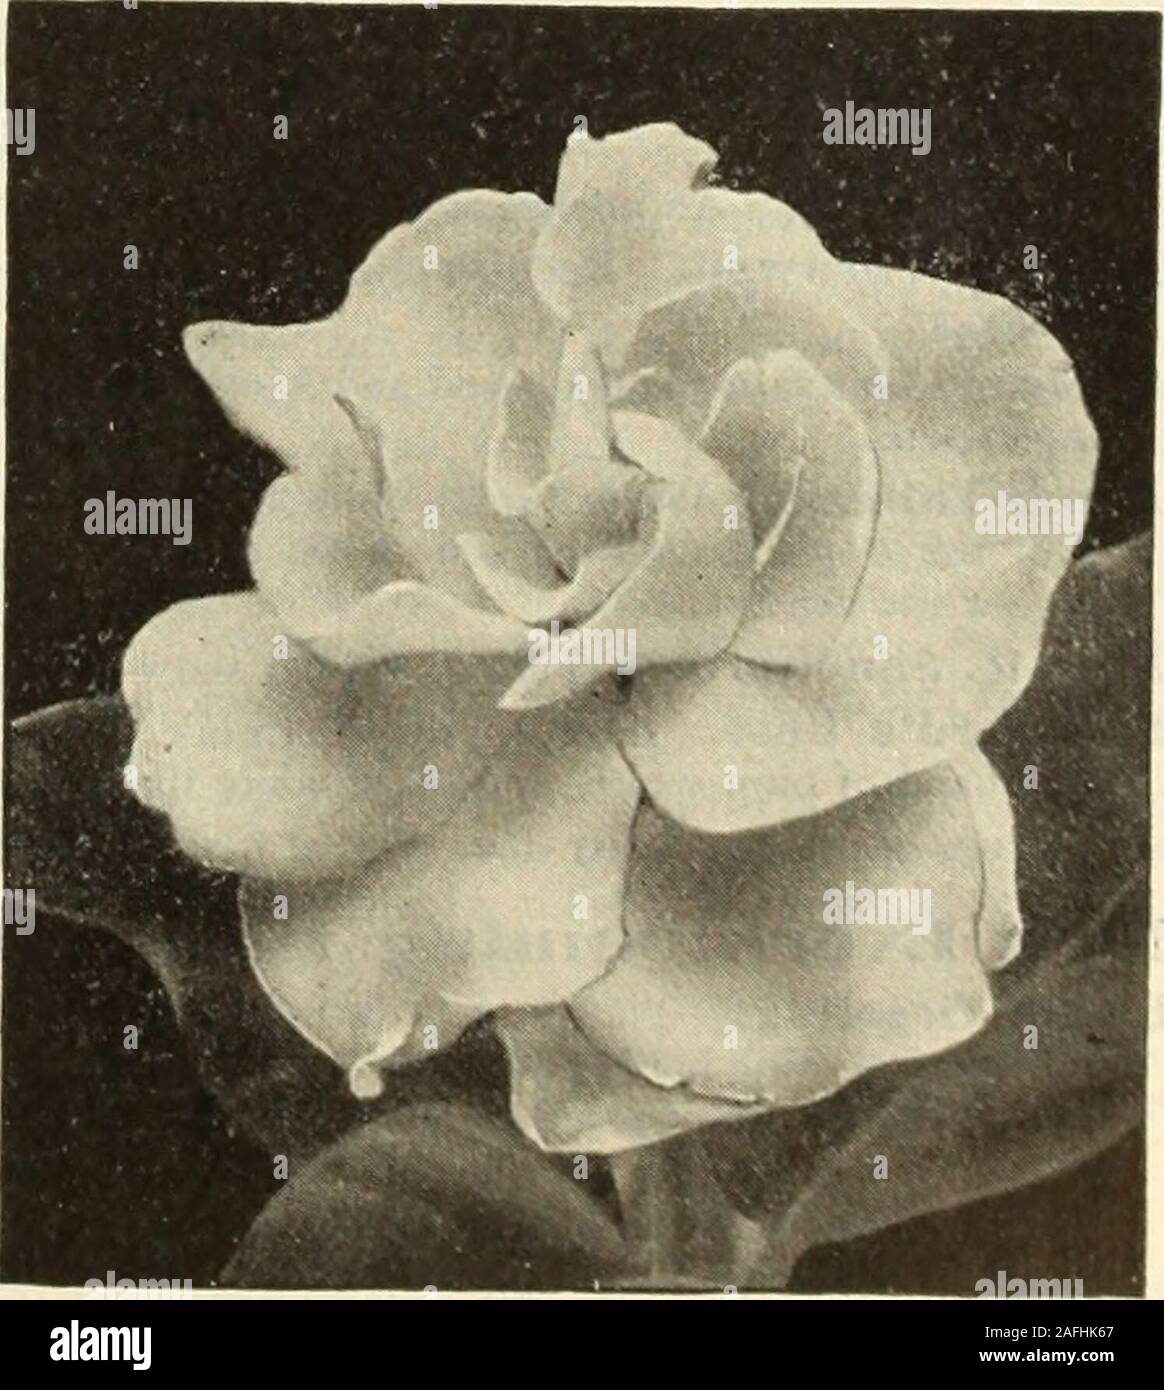 . Dreer's garden book 1915. green shrubs, with delightfully fragrant, purewhite, waxy flowers, blooming from May to July. 3-inch pots, 30 cts. each; $3.00 per doz.; 4-inch pots, 50 cts. each; $5.00perdoz.; 6-inch pots, $1.00 each. GENISTA. Fragrans. A most desirable .=pring-flowering plant, producing its fragant,bright, golden-yellow flowers in the greatest profusion. As a windowplant of easiest culture it is unsurpassed. Especially de.sirable for Easterdecoration. First size, 50 cts. each; $5.00 per doz.; second size, 30 cts.each; $3.00 per doz. GL,ORIOSA (ClimbineLily). Superba Rothschildian Stock Photo